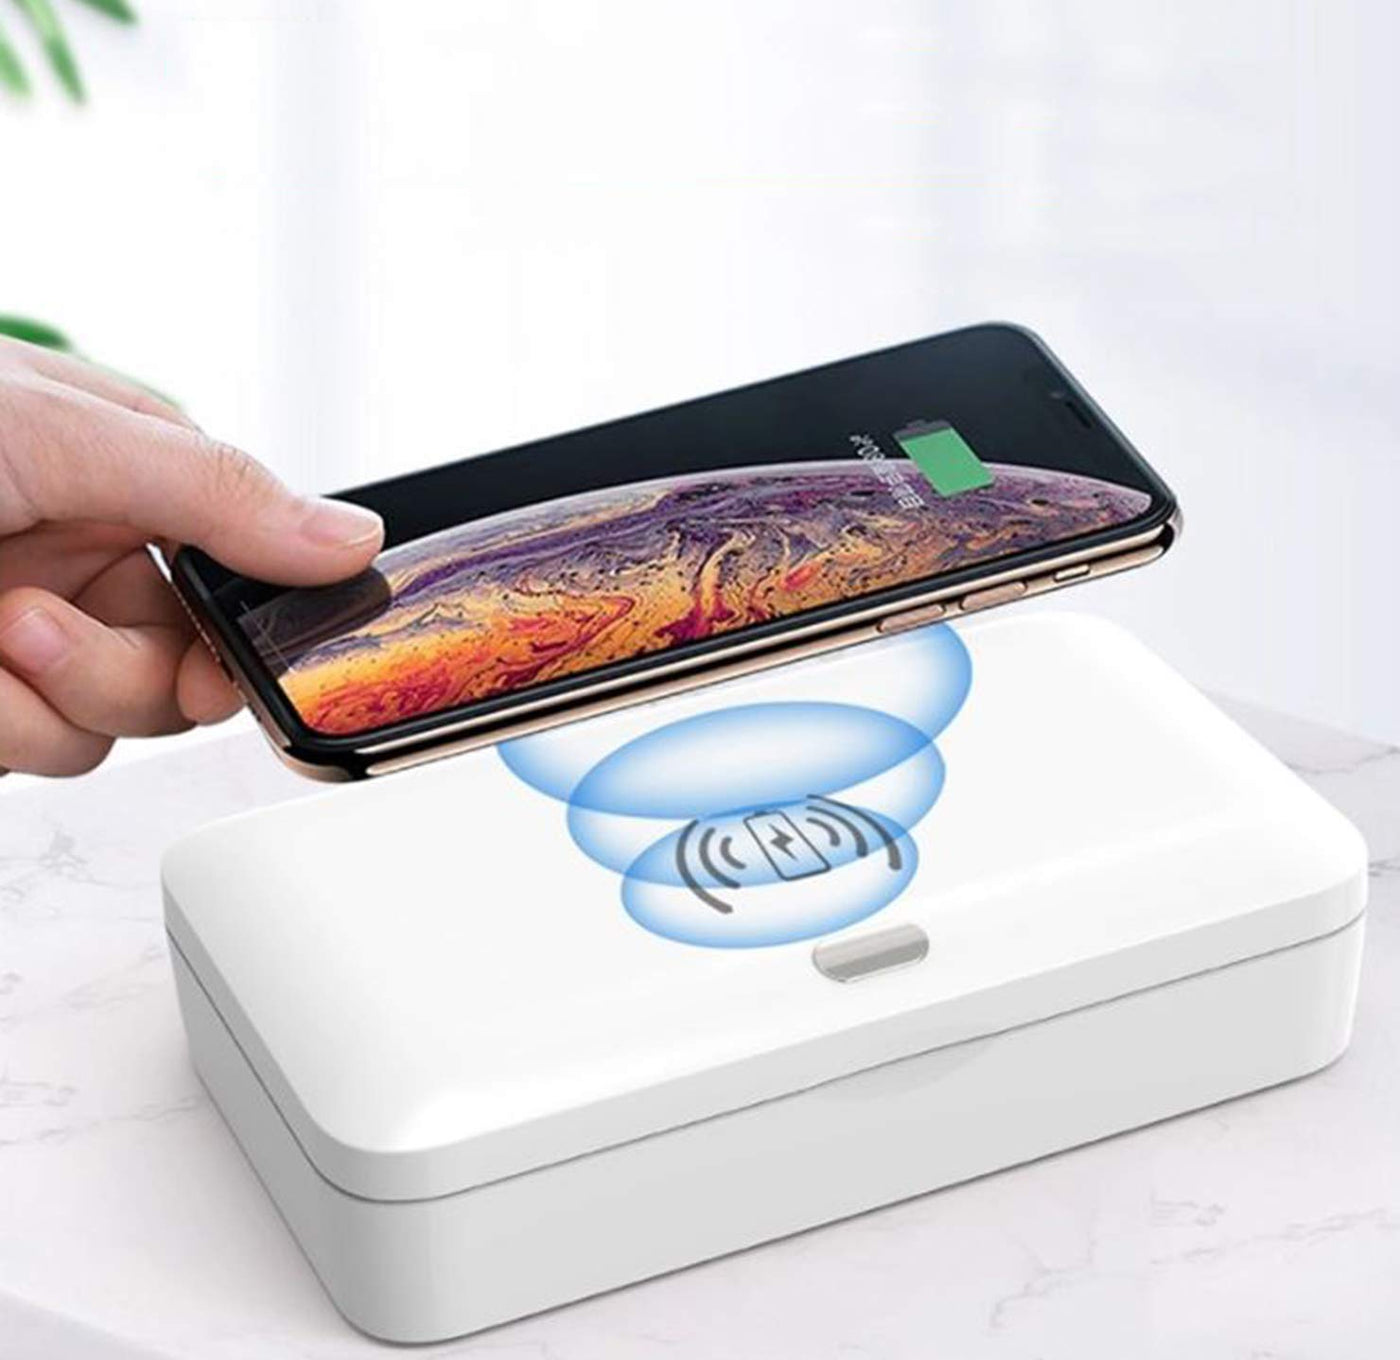 UV Light Sterilizer Box With Wireless Phone Charger, UV-C Disinfection for Mobile Phone, Salon Tool, Nail Clippers, Toothbrush, Jewelry, Watches - White